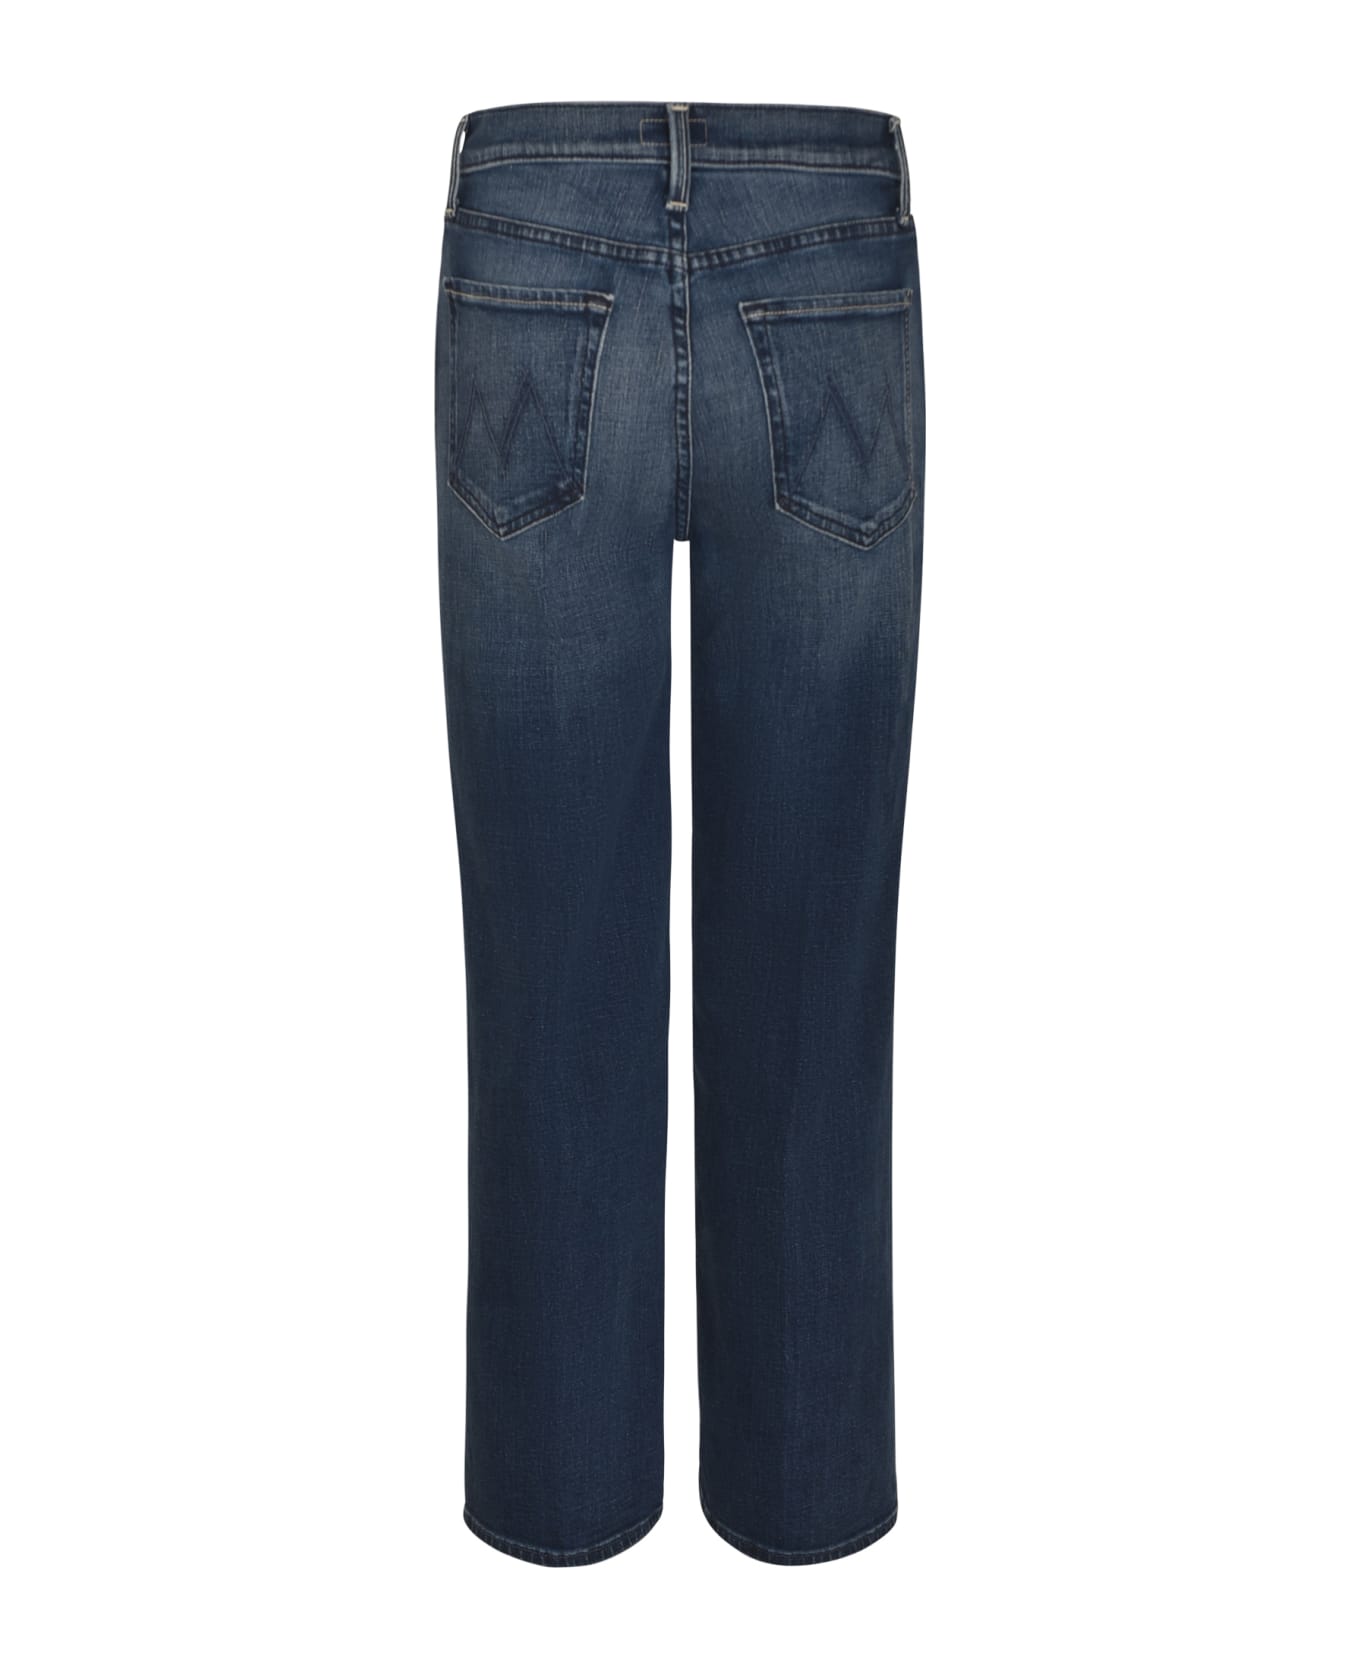 Mother The Rambler Zip Ankle Jeans - Stonewash